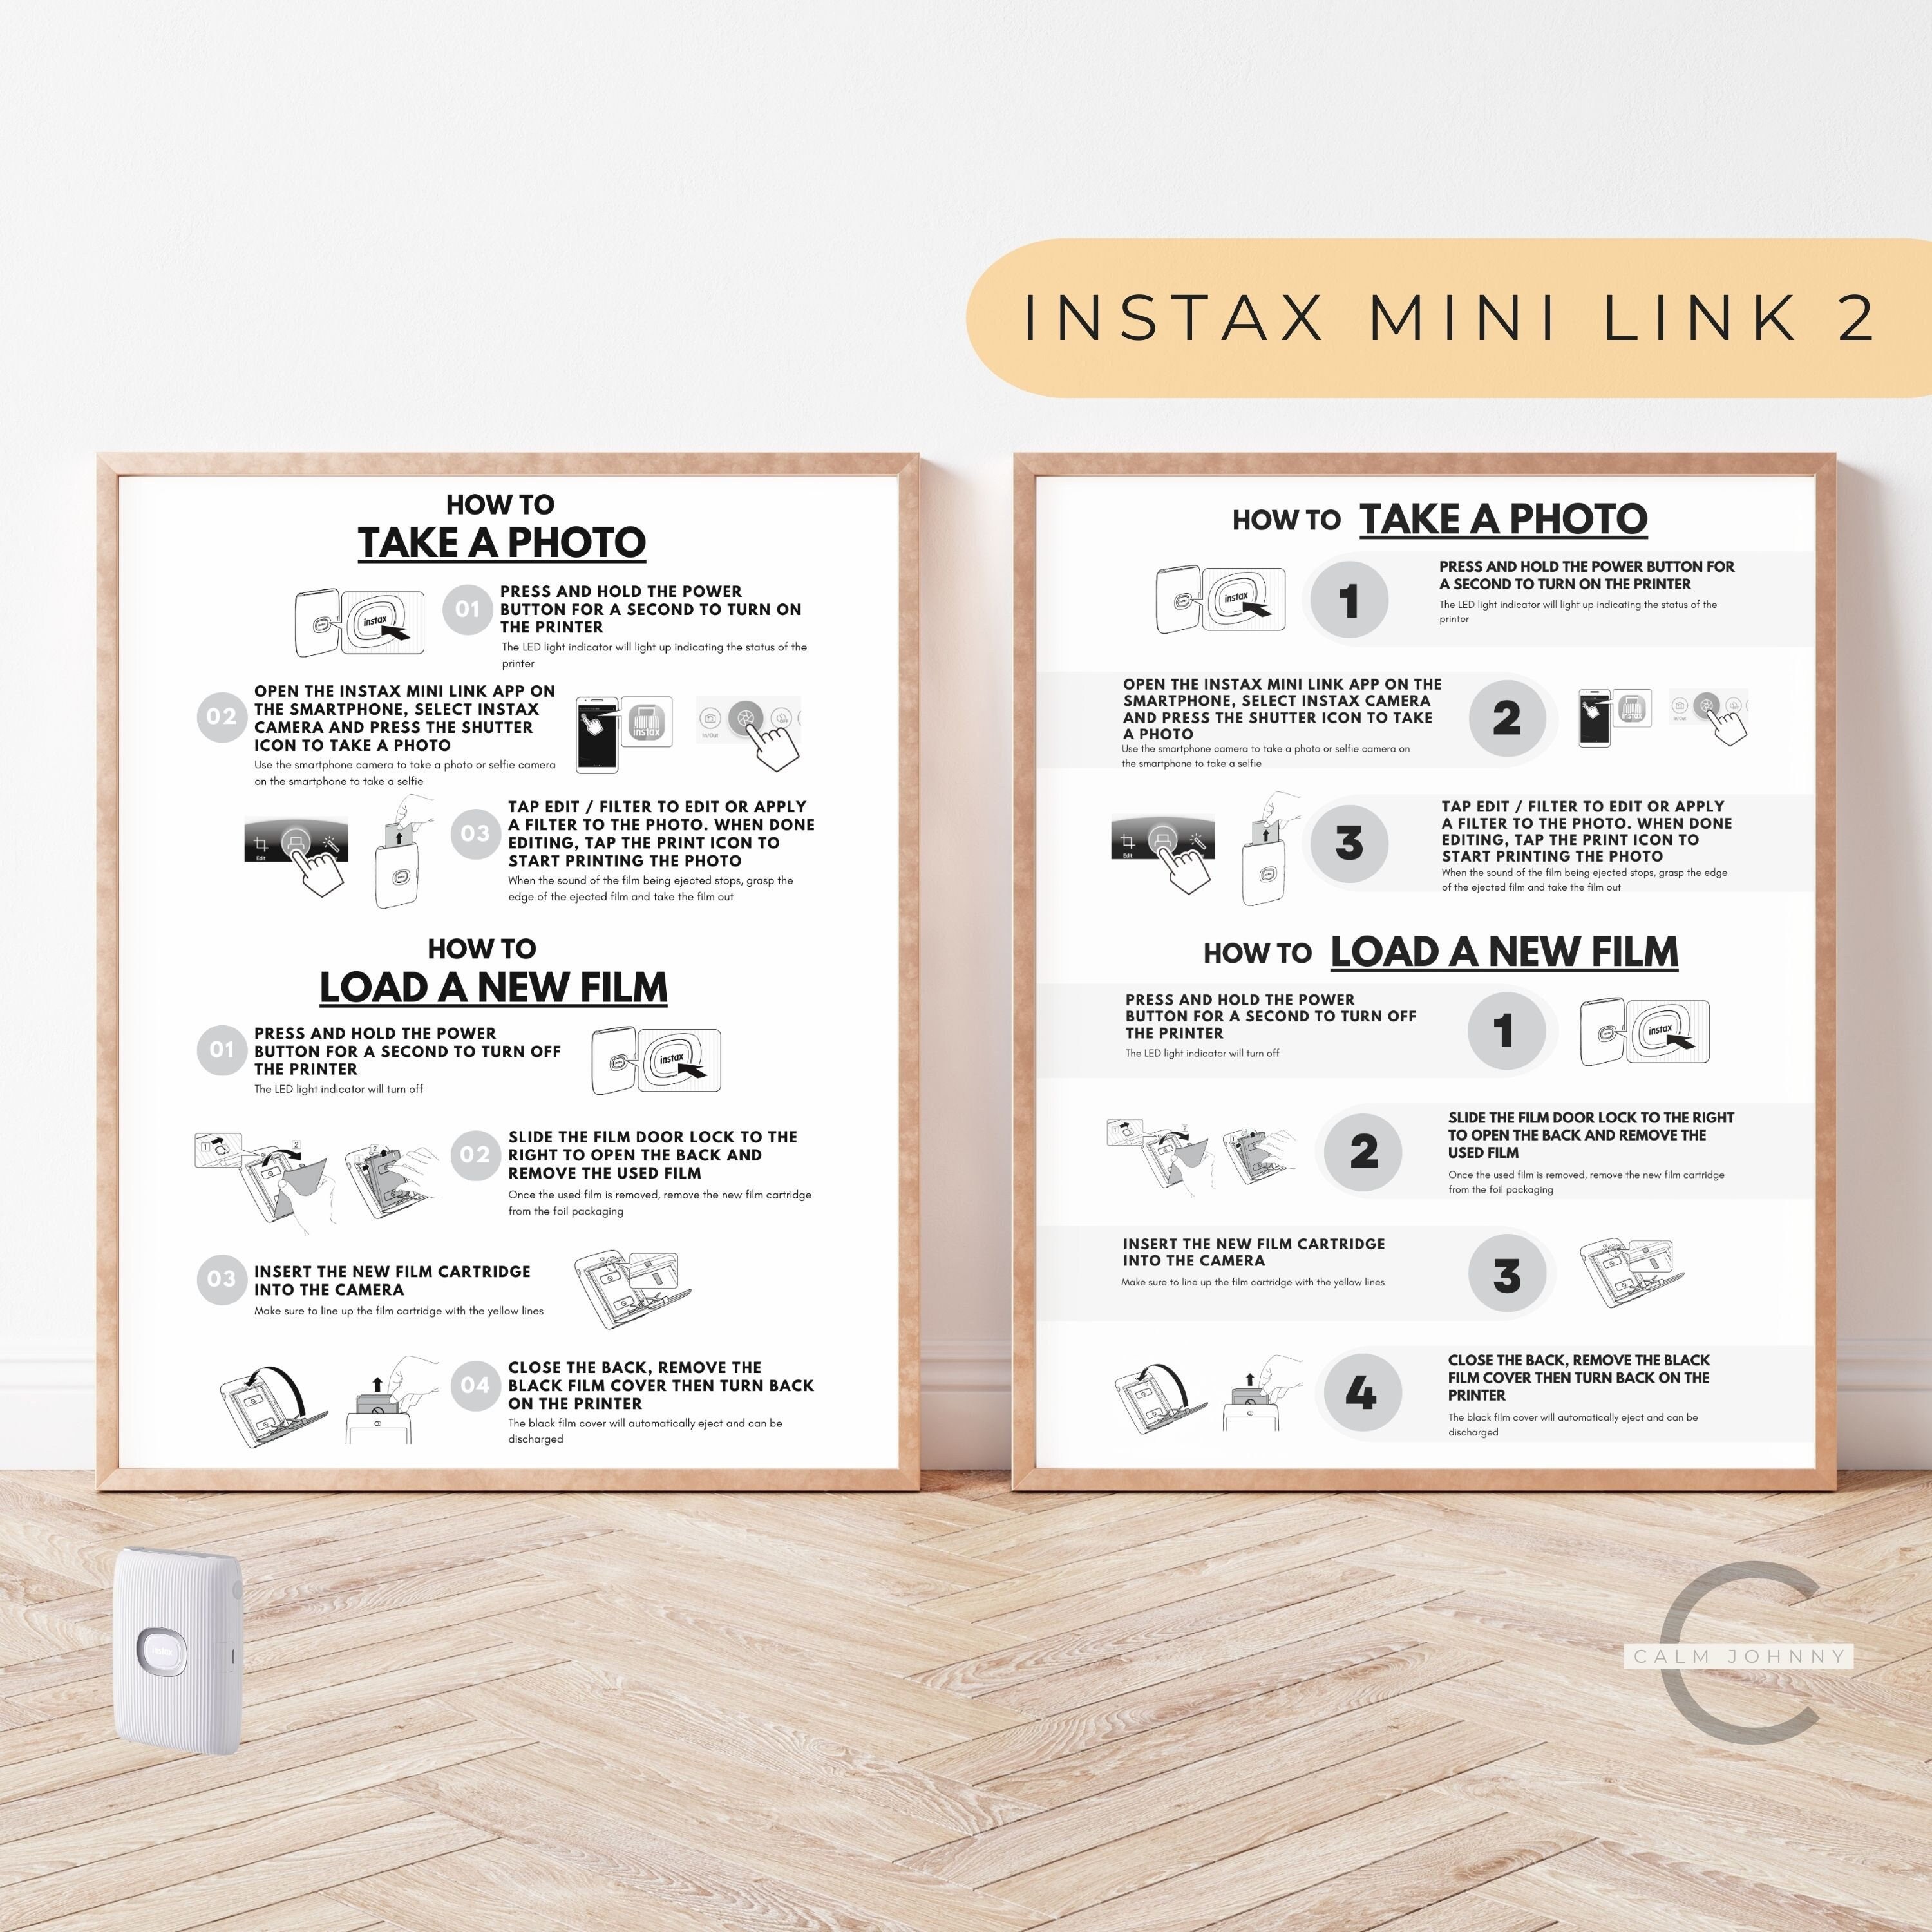 Instax Mini Instant Film, 2 x 10 sheets (20 sheets) – The Couple Challenge  Book